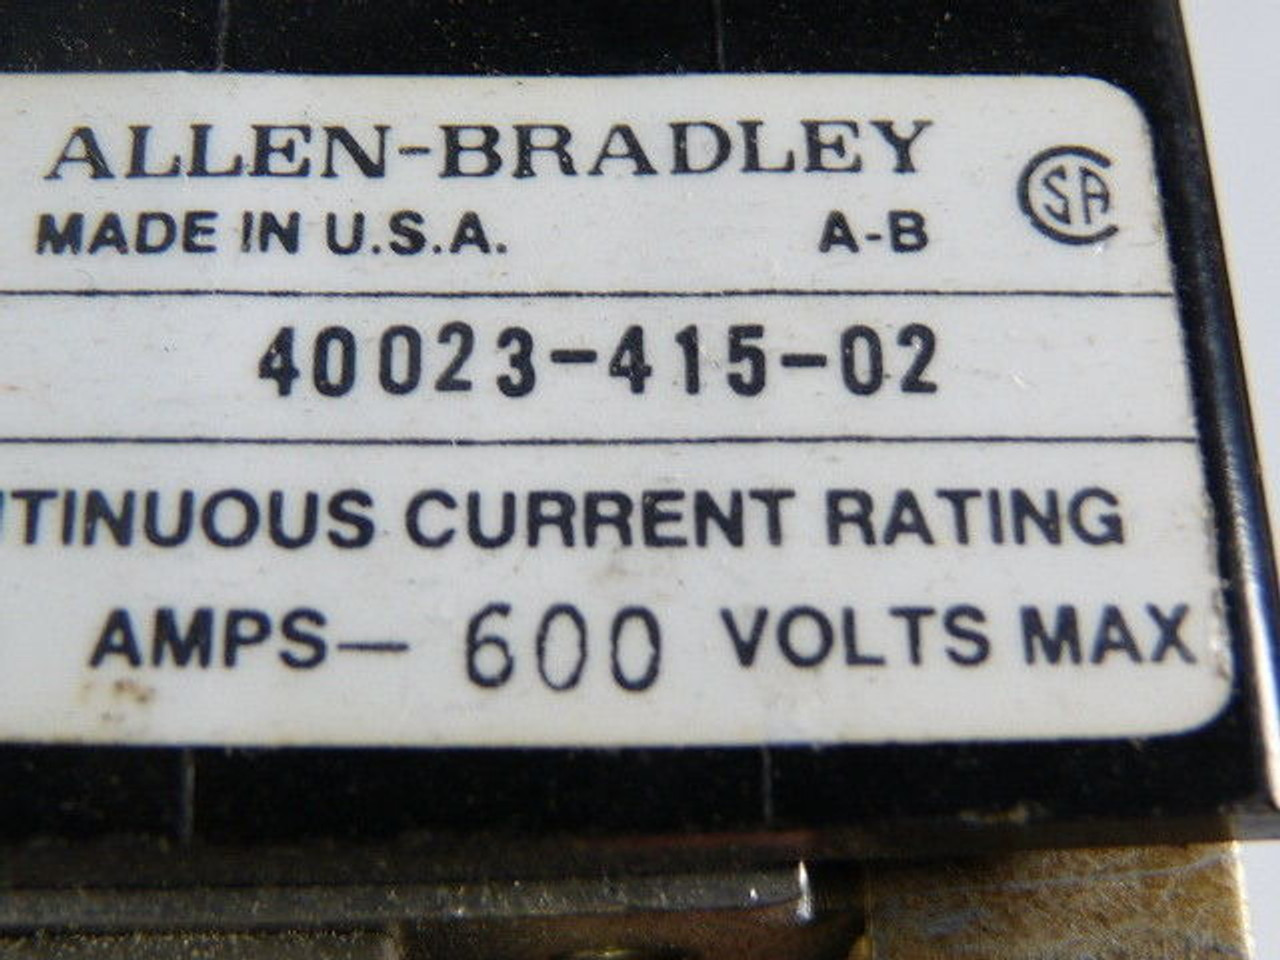 Allen-Bradley 40023-415-02 Fuse Block for Disconnect Switch 30A 600V 3P USED